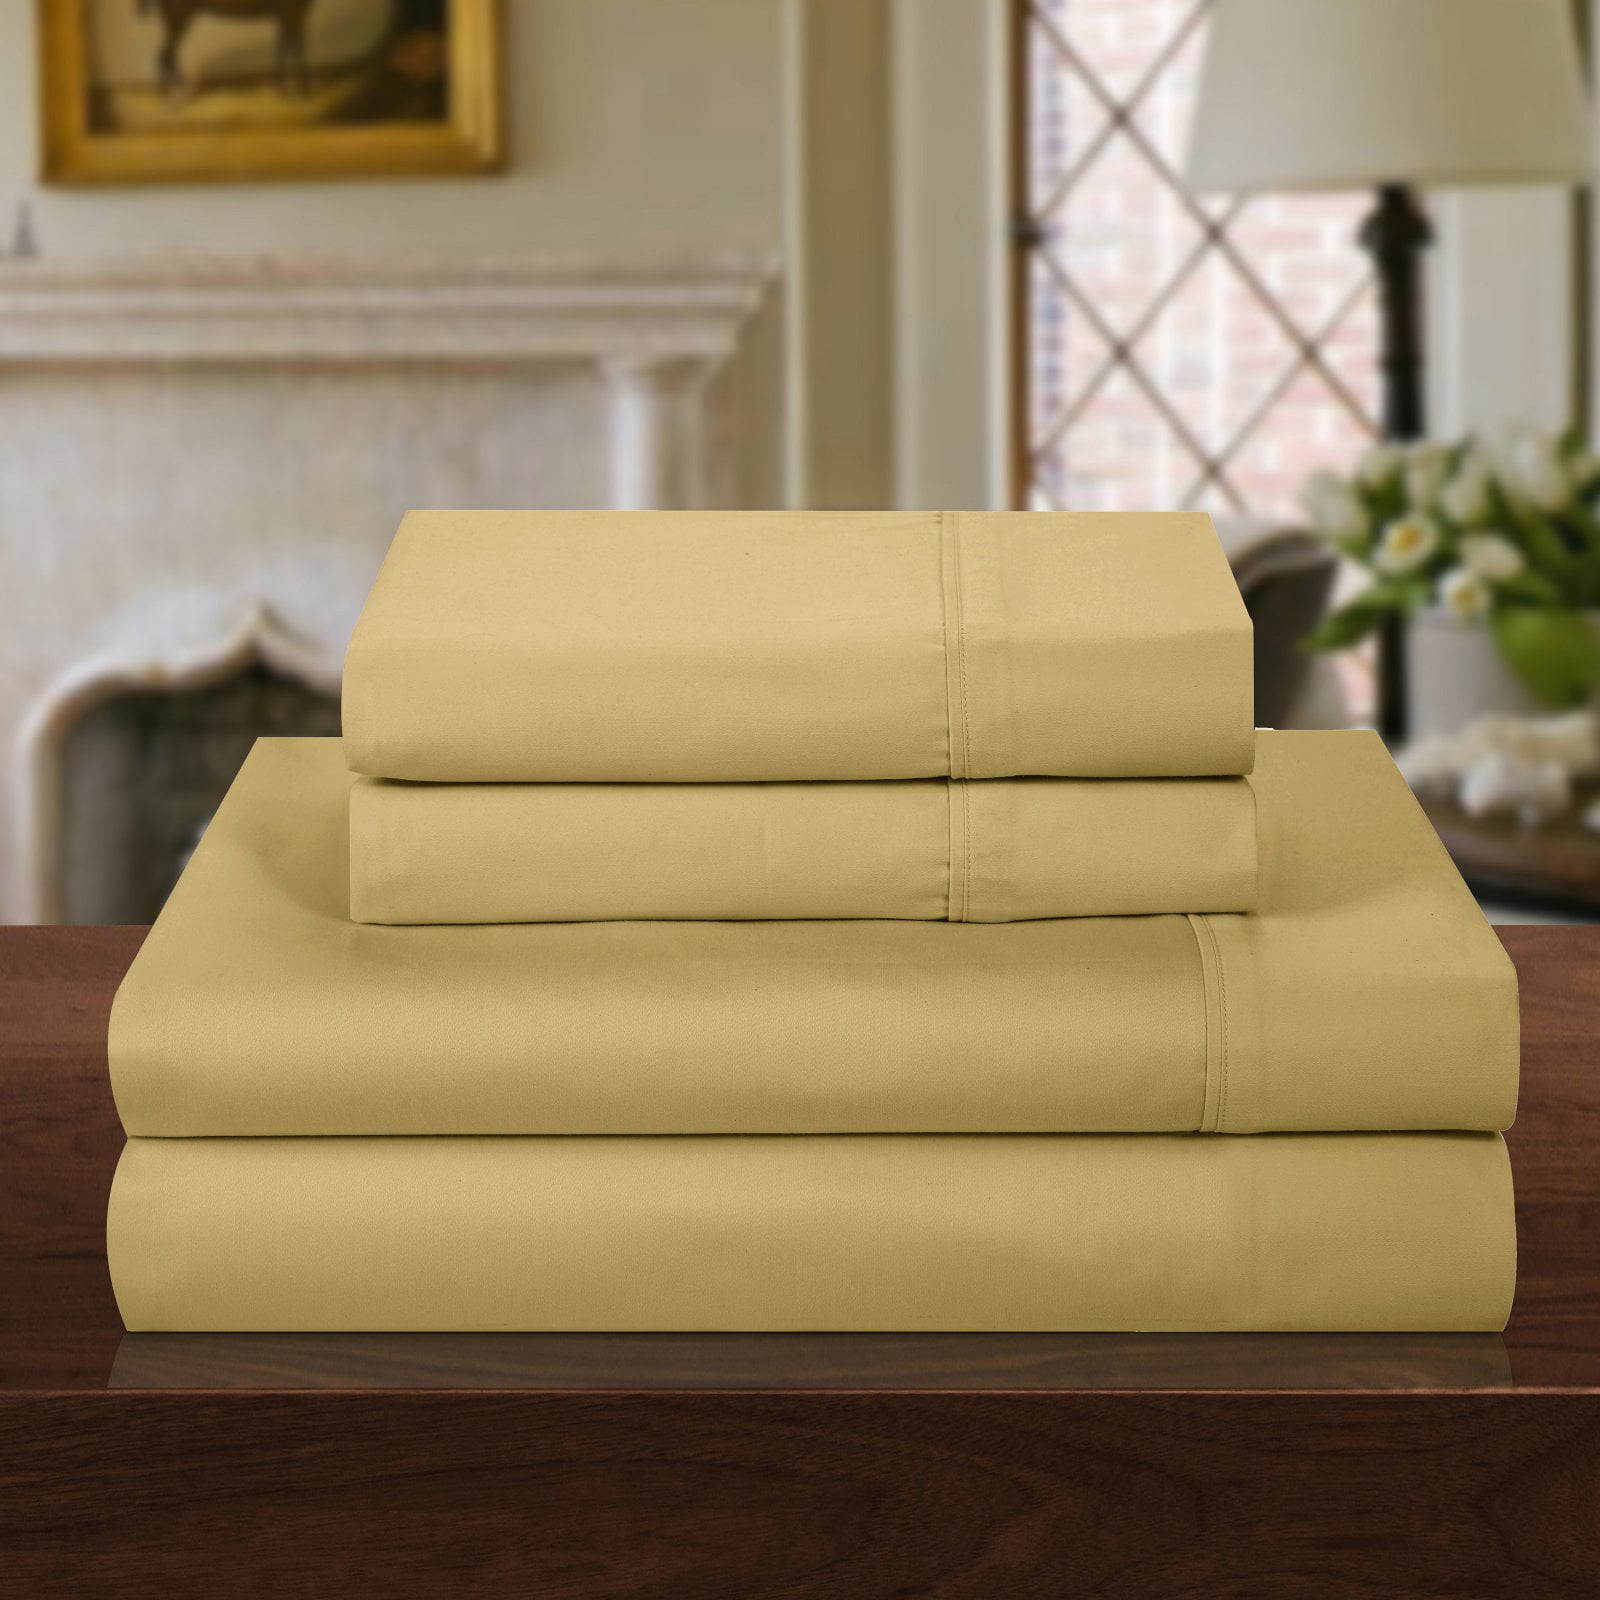 Chic Home 1000 Thread Count 4 Piece Luxury Sheet Set Queen Solid White SS0660-507-AN